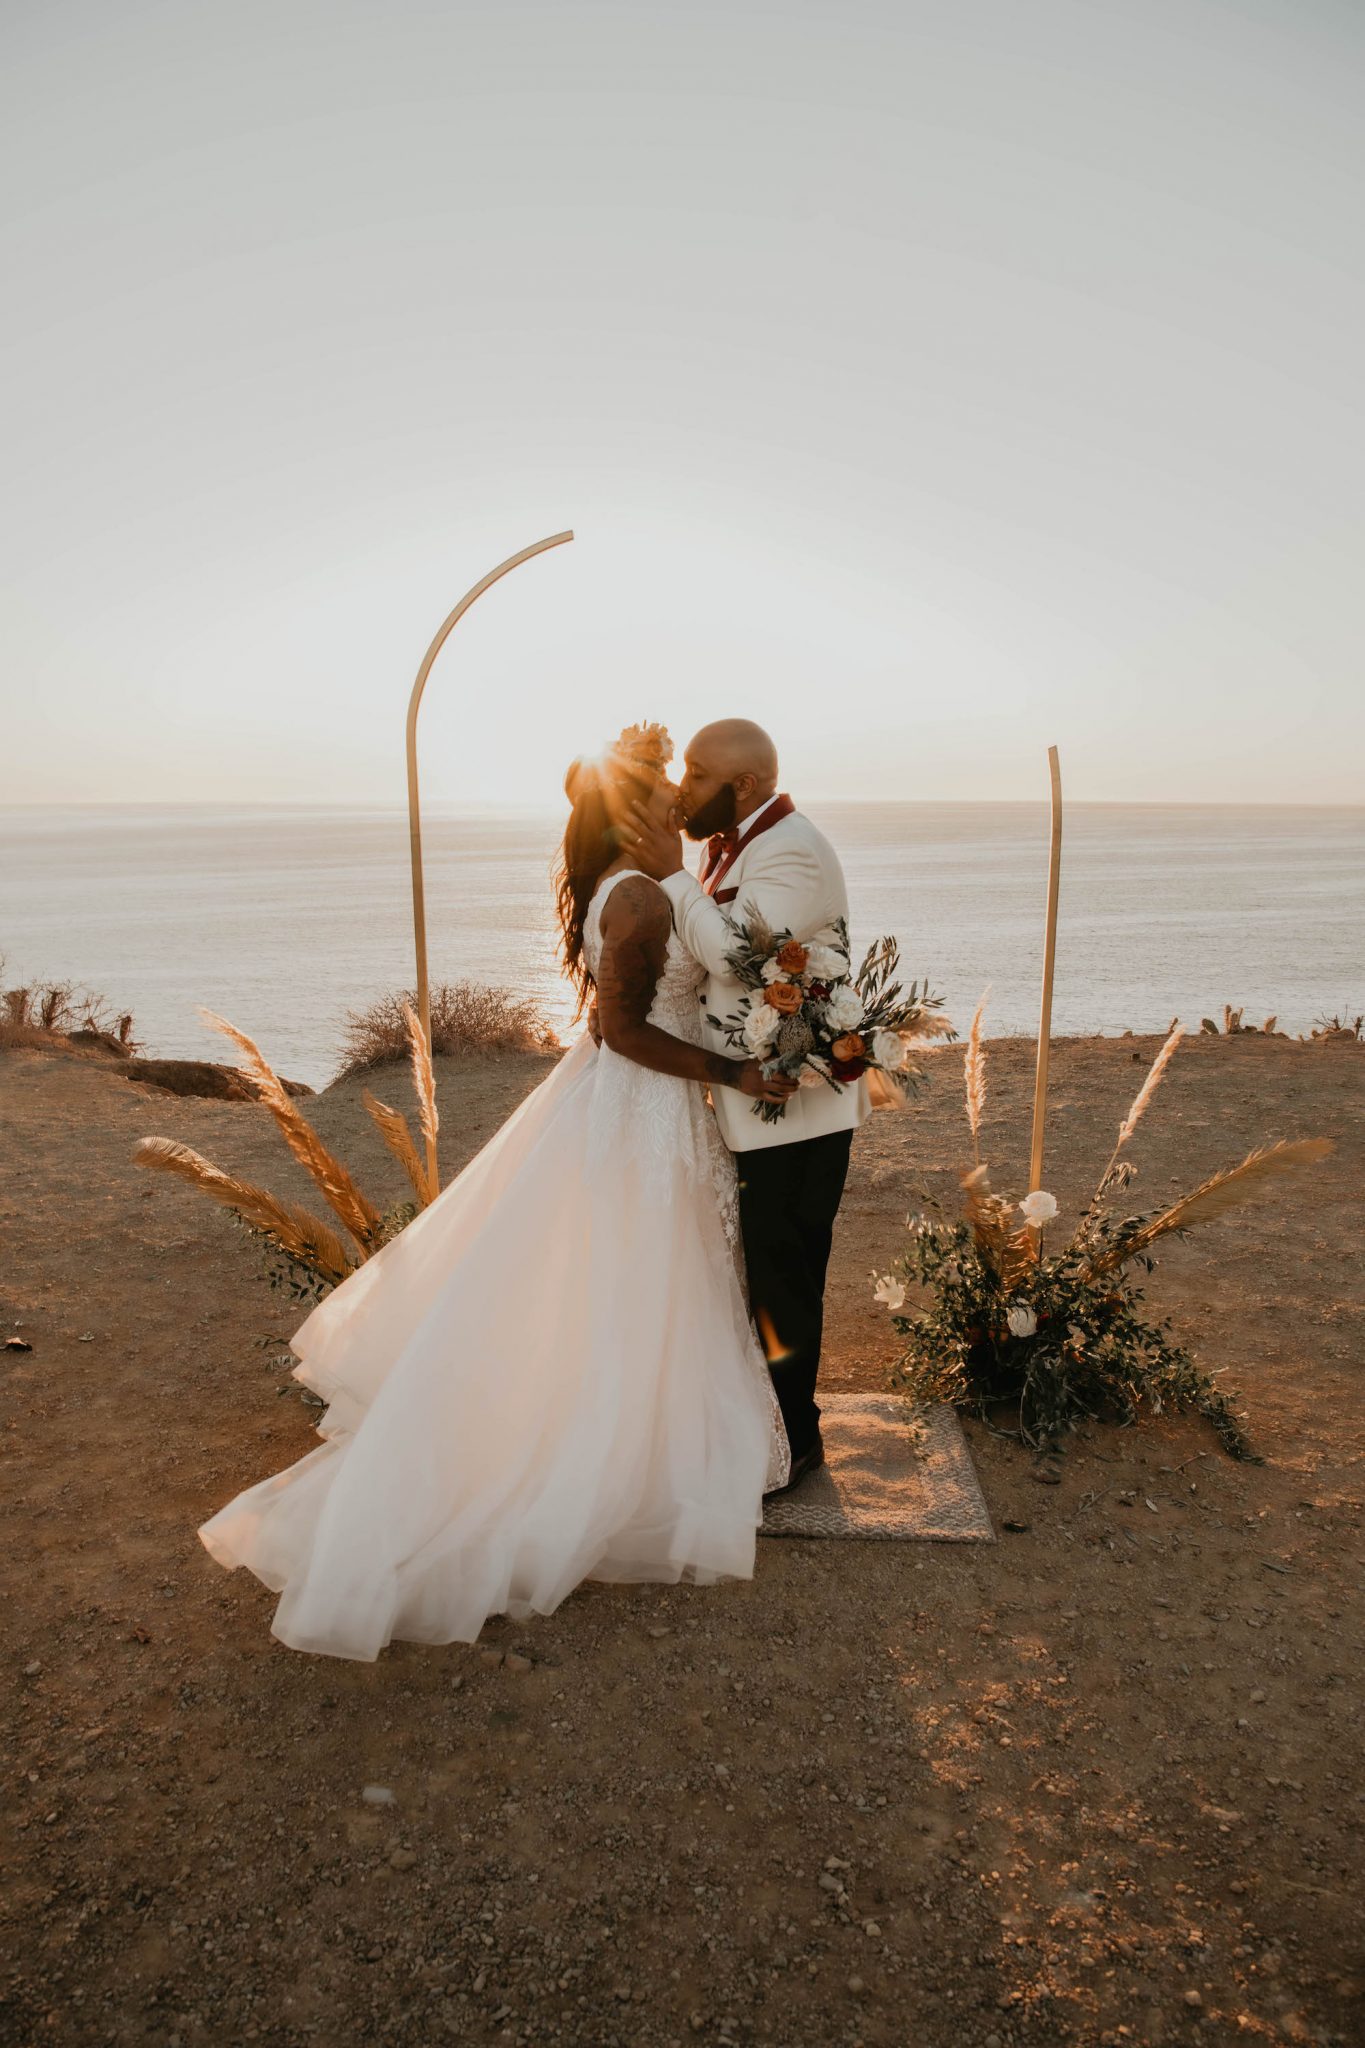 Boho Malibu Elopement florals and elopement planner meadows events. photos by amanda meisters photography